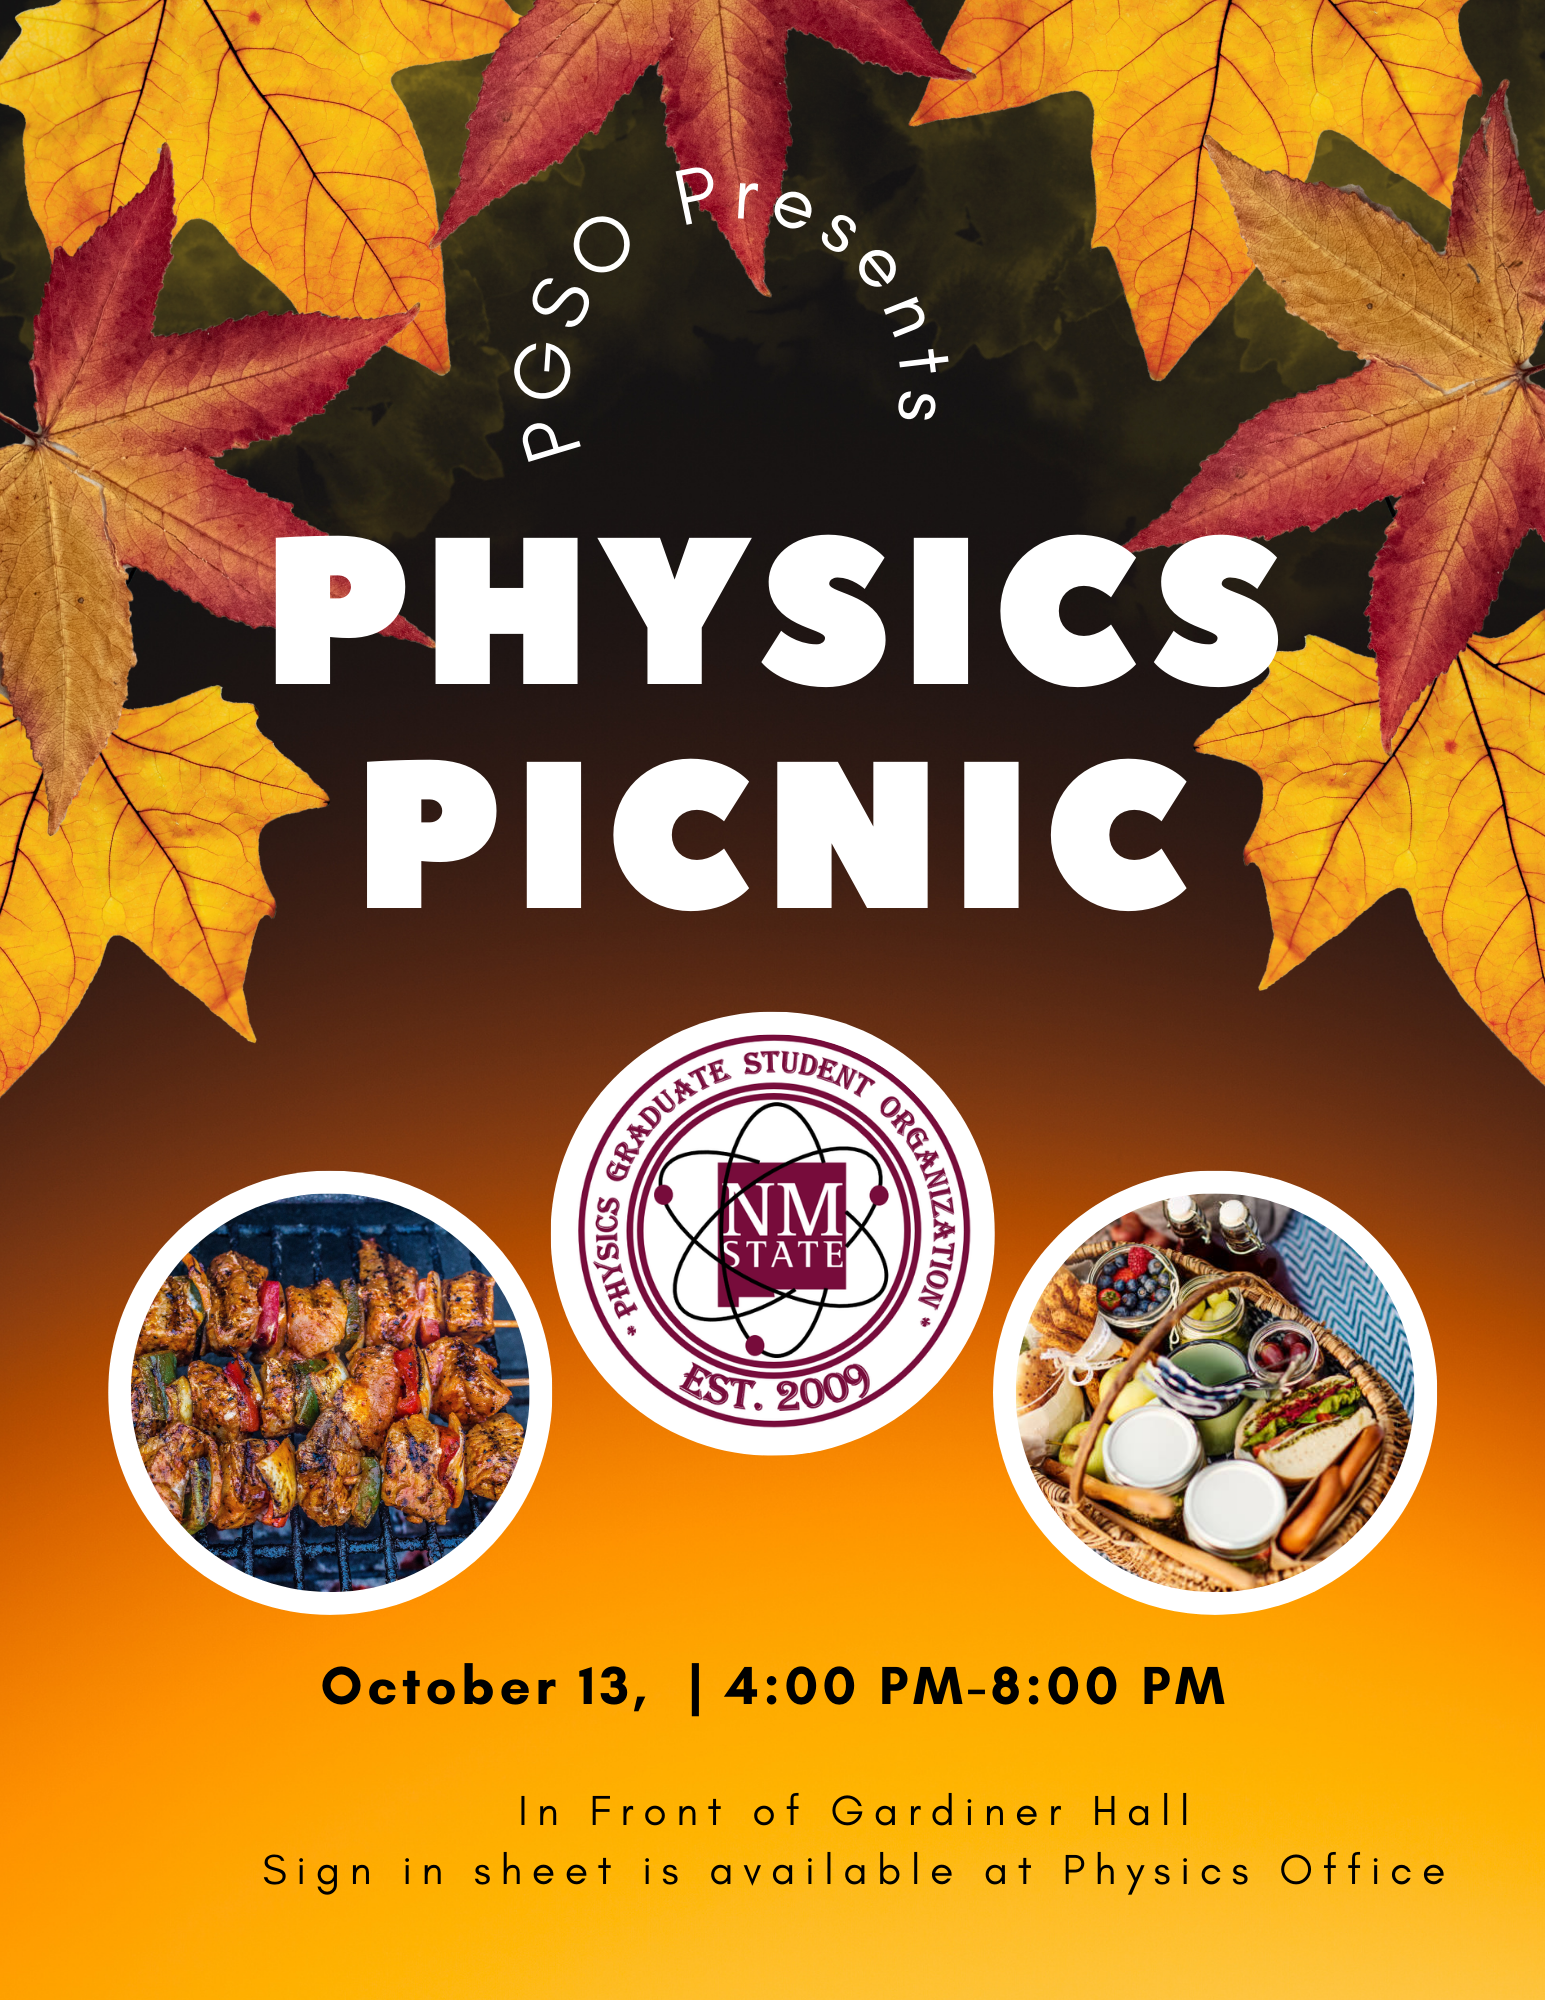 Poster of kabobs and picnic food with a fall leaf background